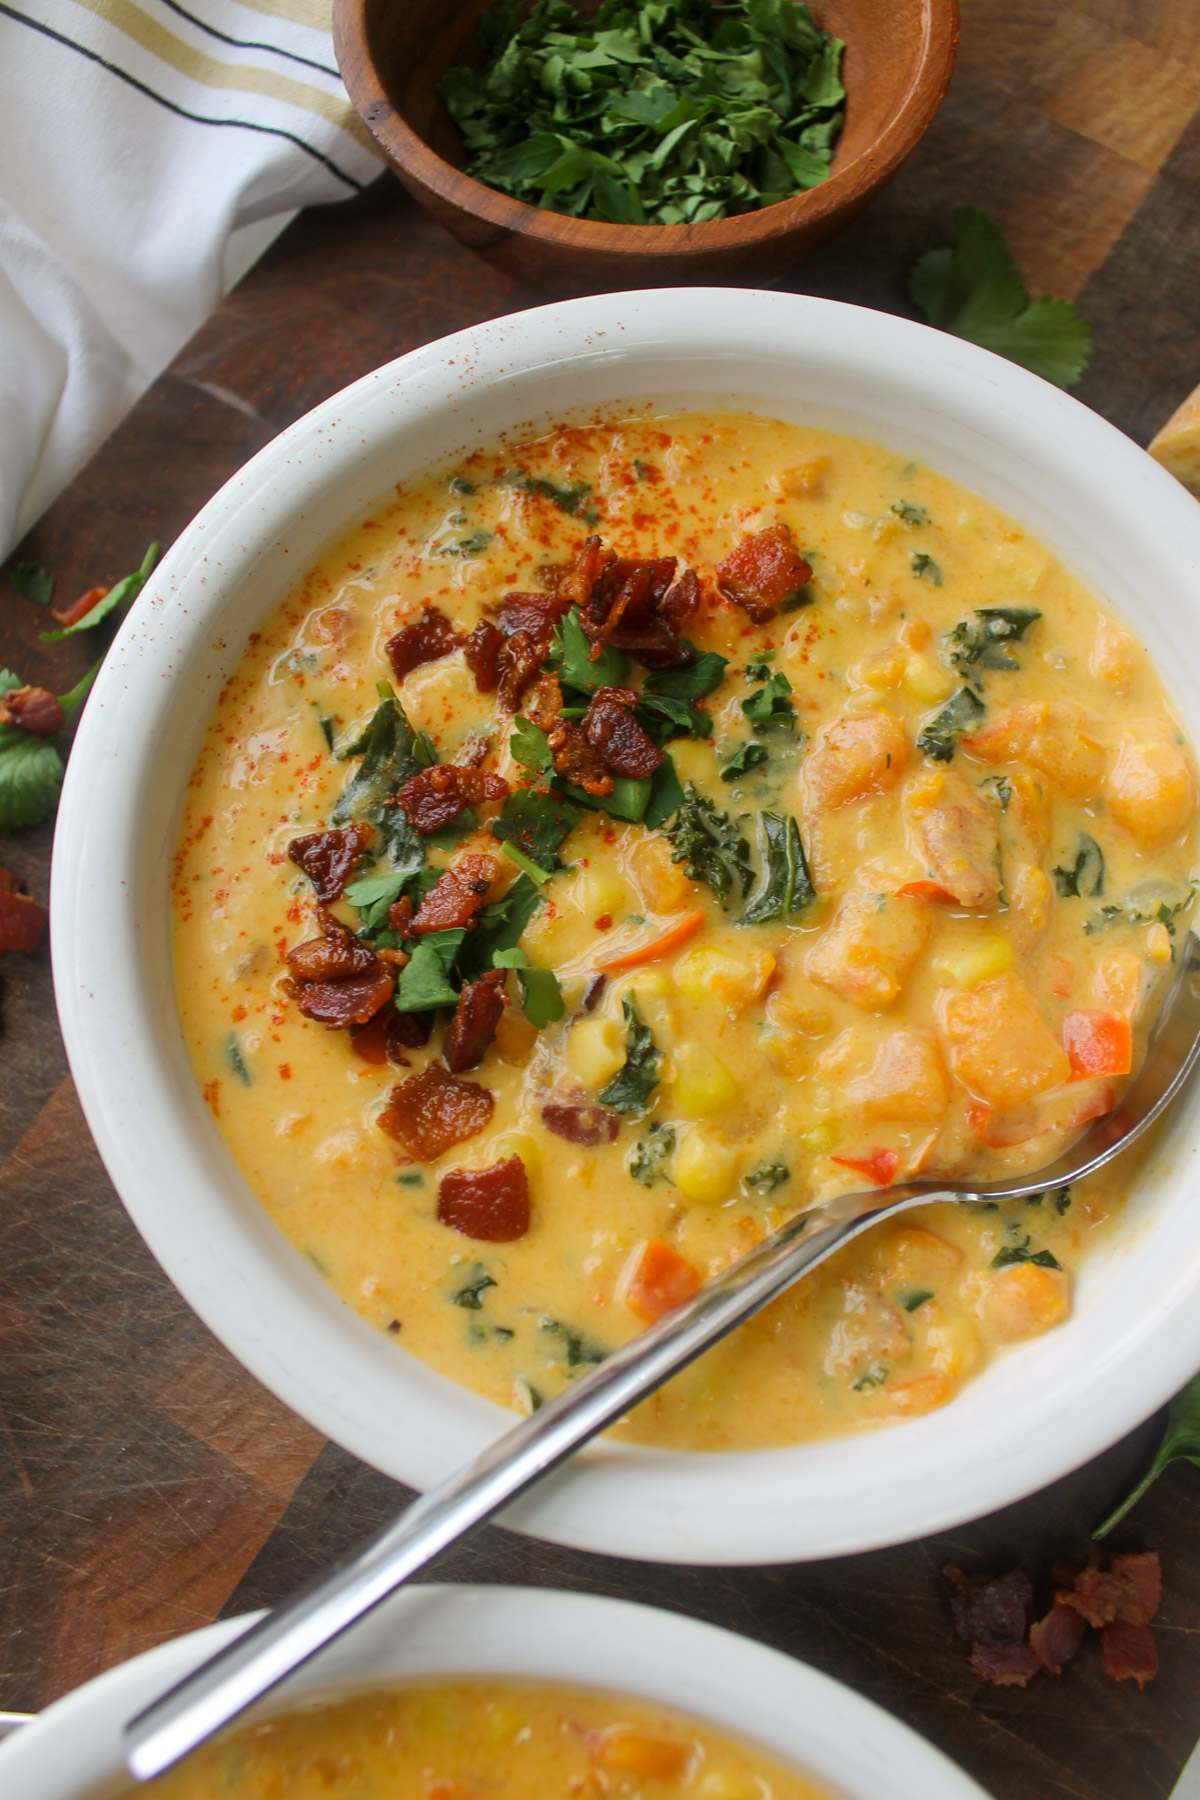 Bowls of sweet potato corn chowder with kale and crispy bacon.